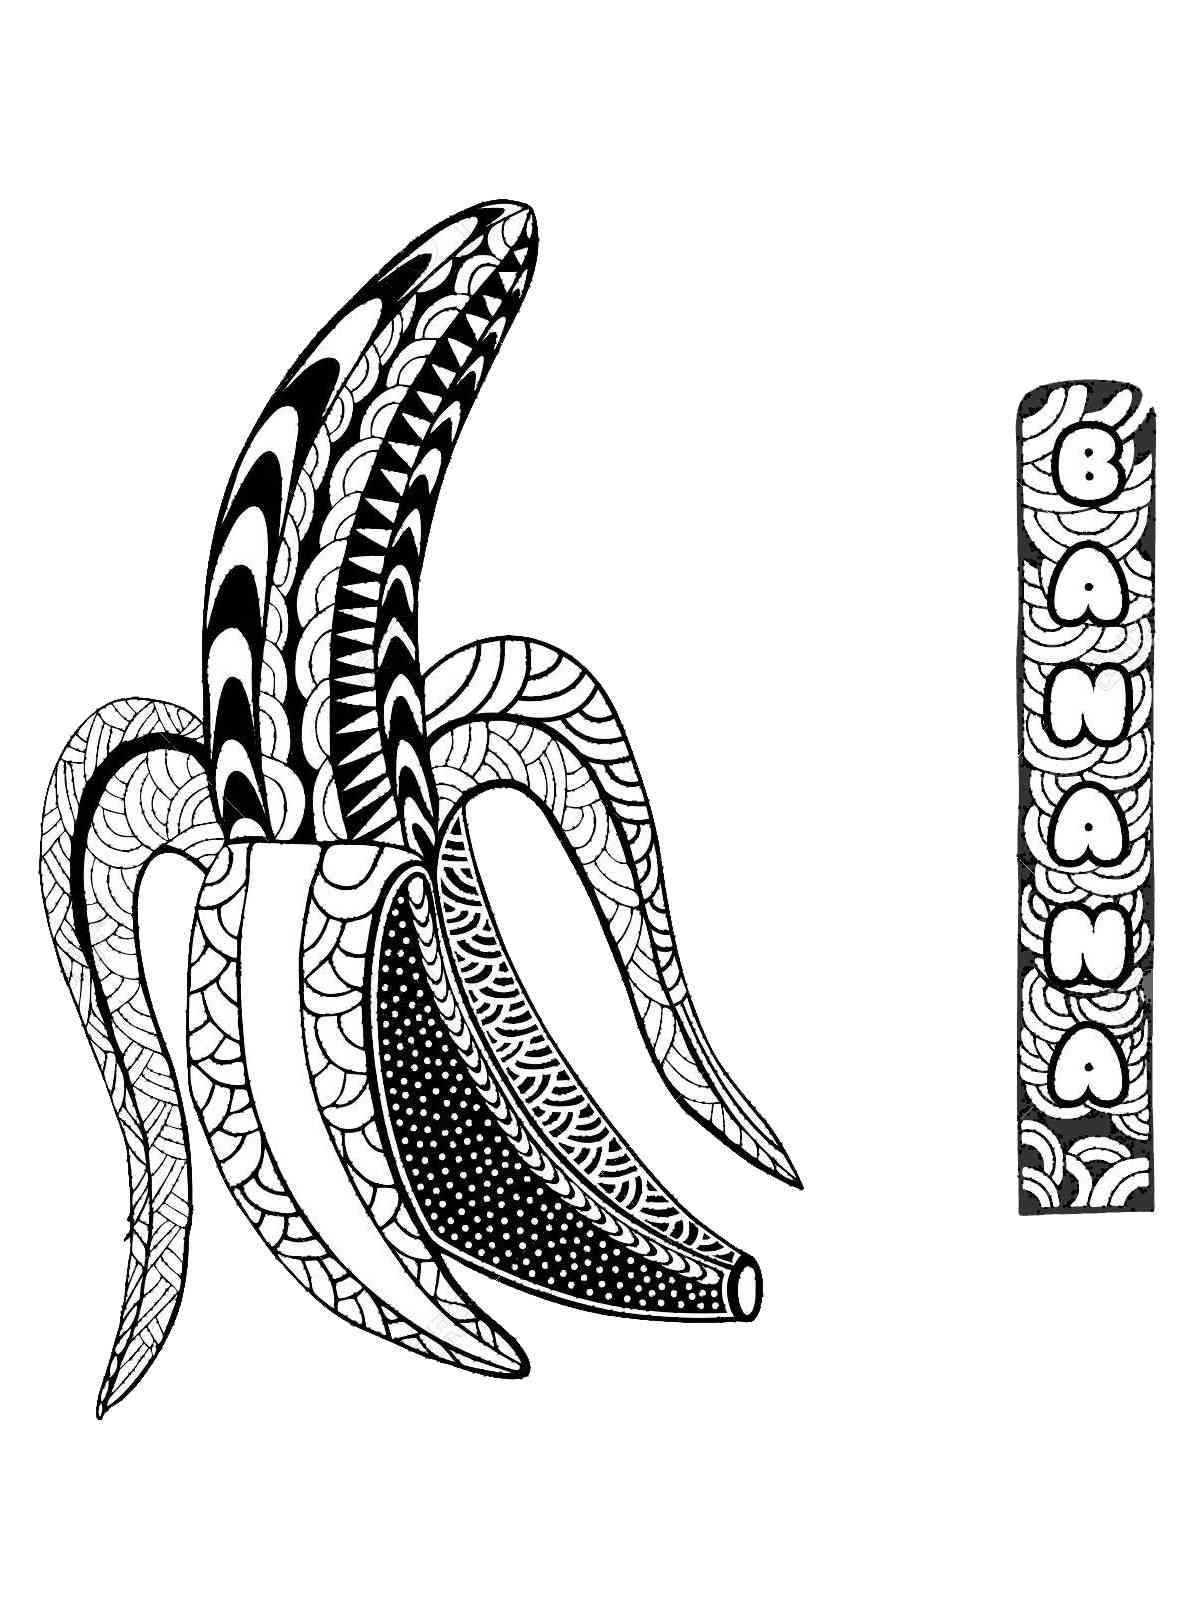 Banana coloring pages for adults